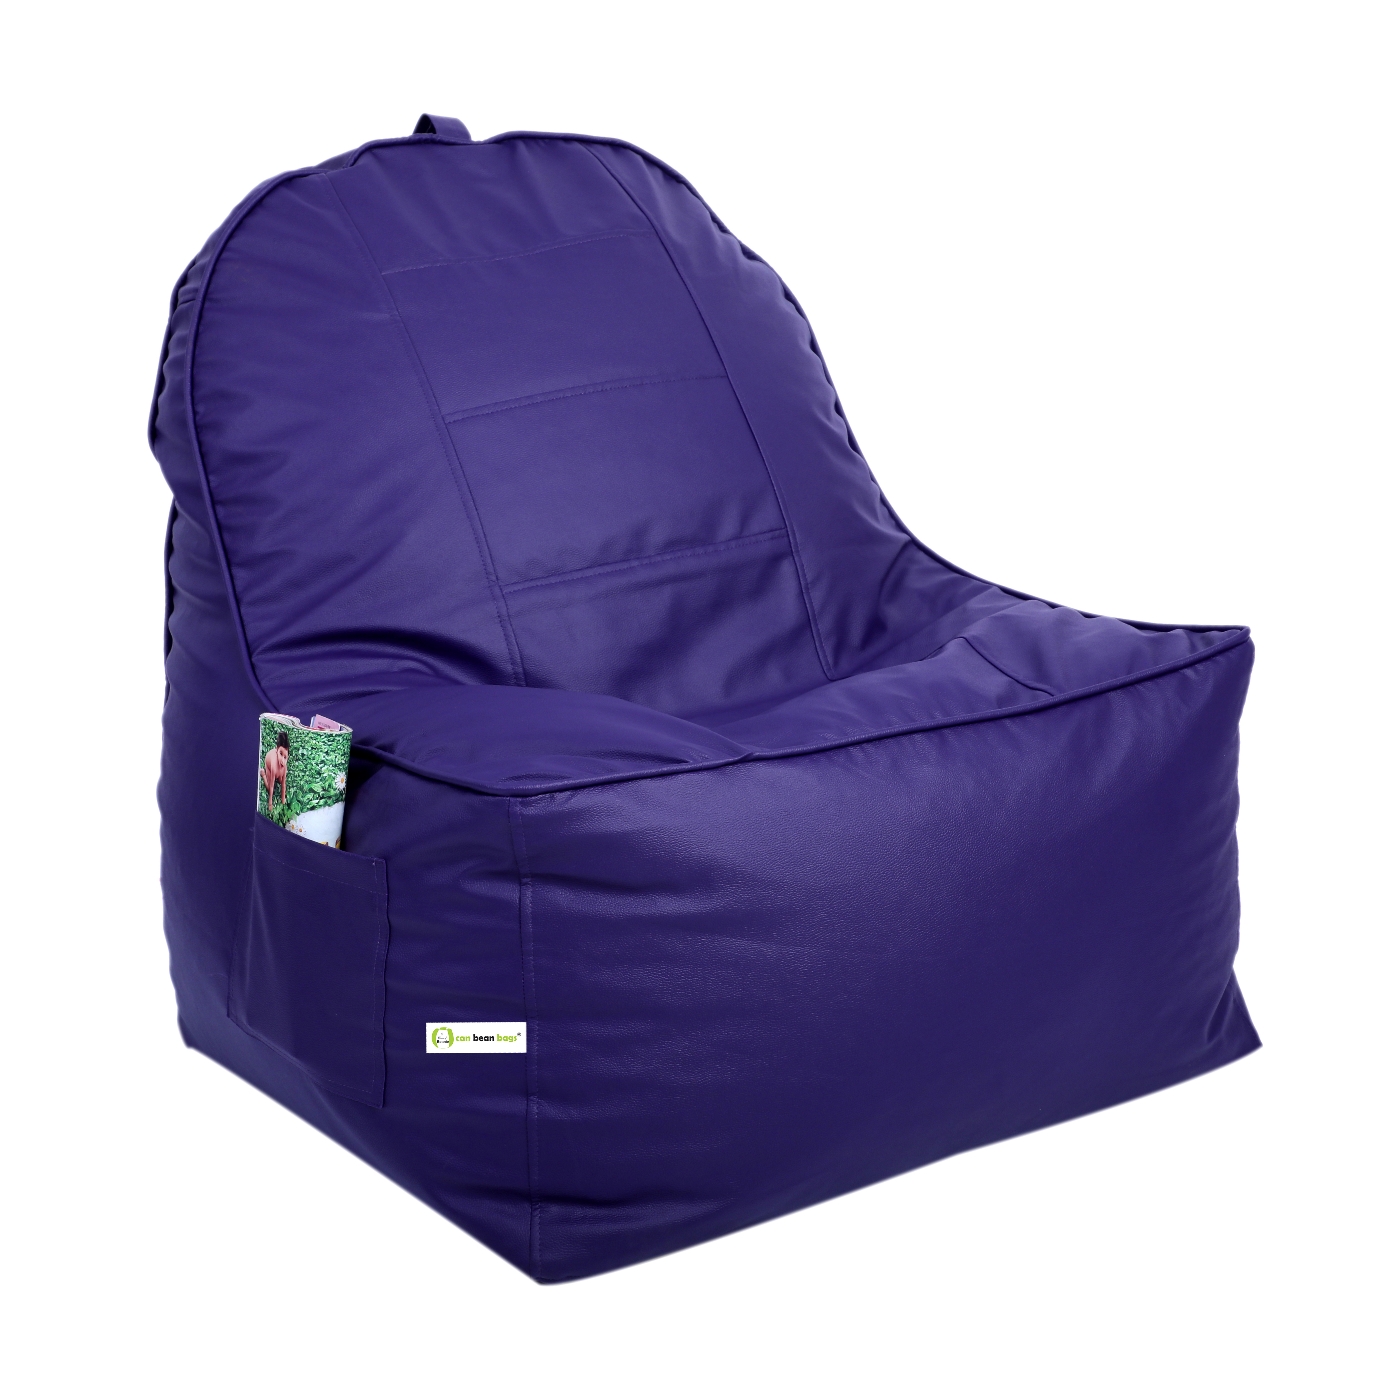 Can bean bags Compact Lounger Purple | Orka Home